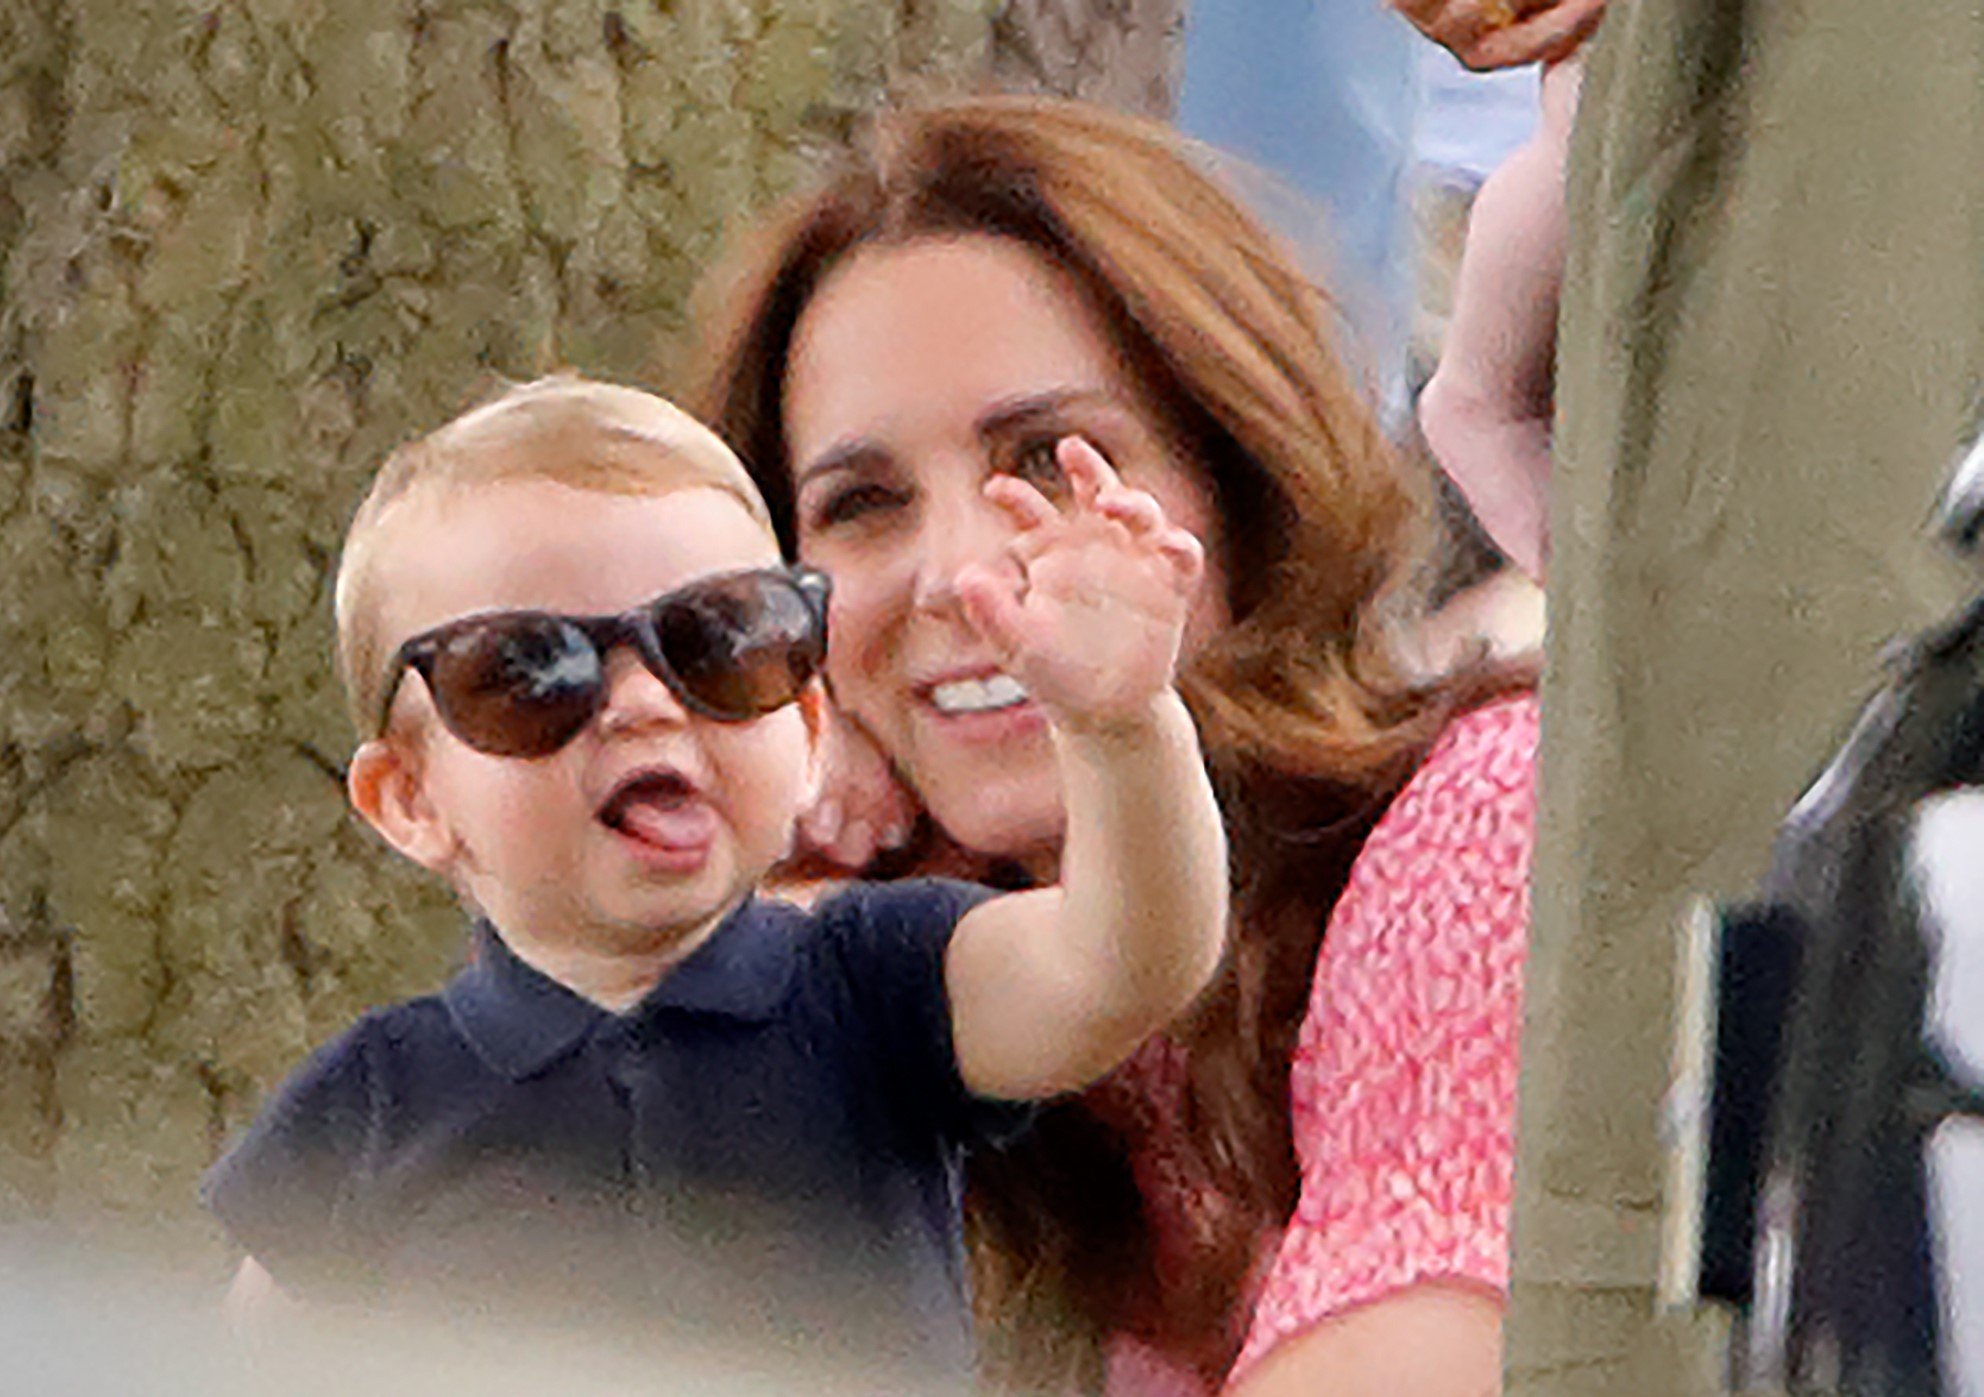 Prince Louis in sunglasses at Polo Club where his dad Prince William was competing in a match